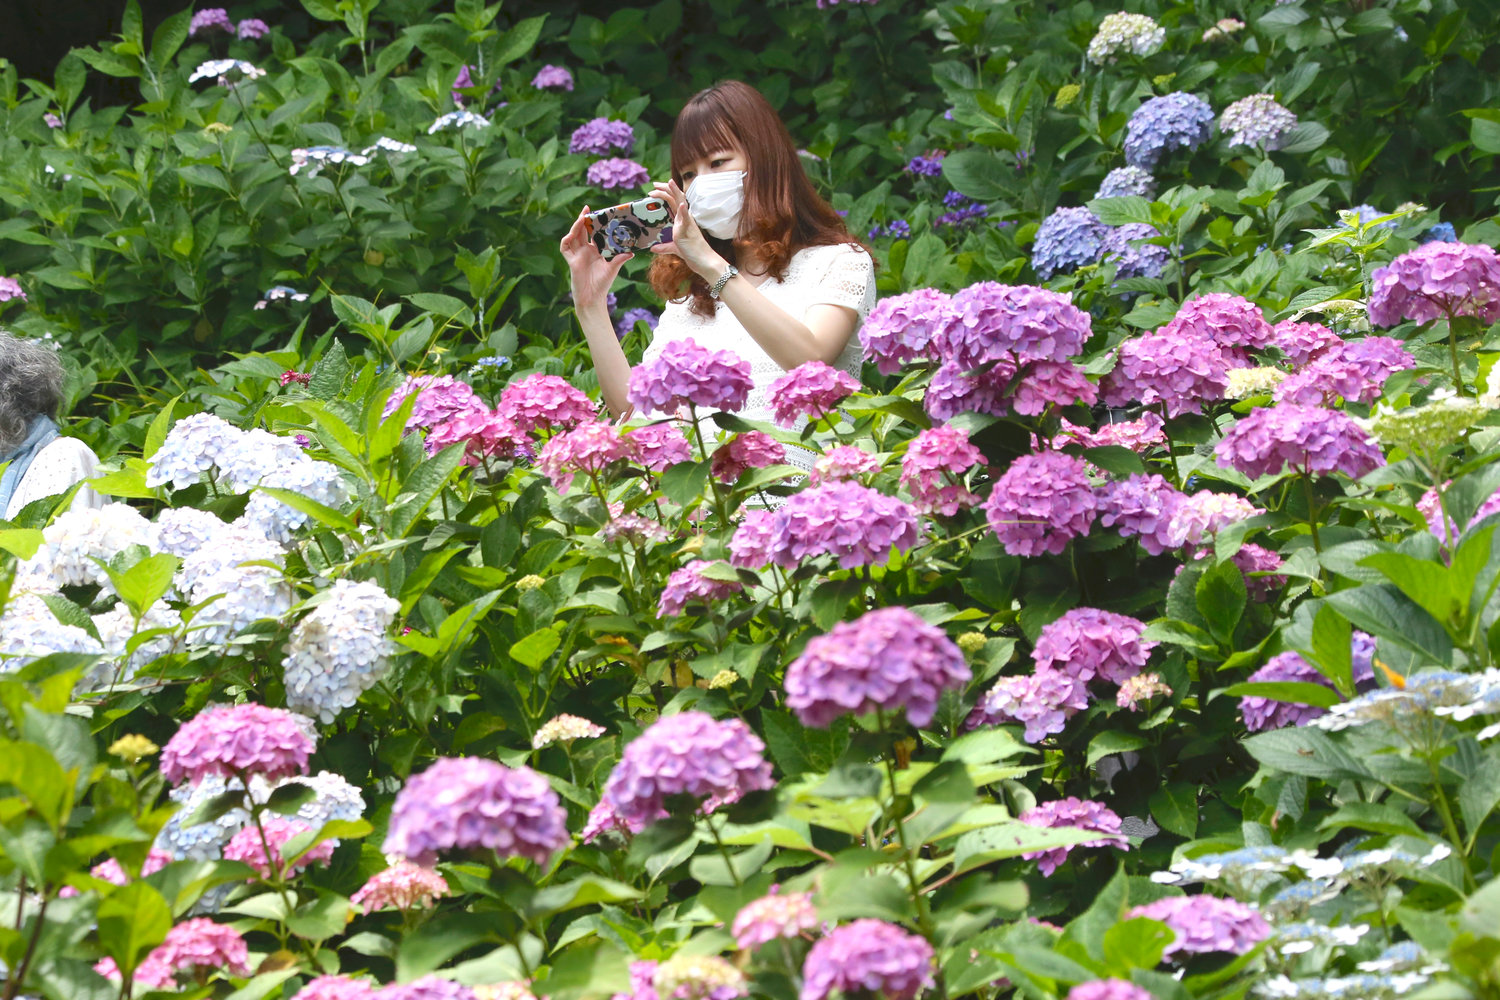 A woman wearing a face mask to protect against the spread of the new coronavirus takes a photo of full bloomed hydrangea at Hasedera temple in Kamakura, near Tokyo. The Buddhist temple is one of Kamakura’s famous hydrangea spots.